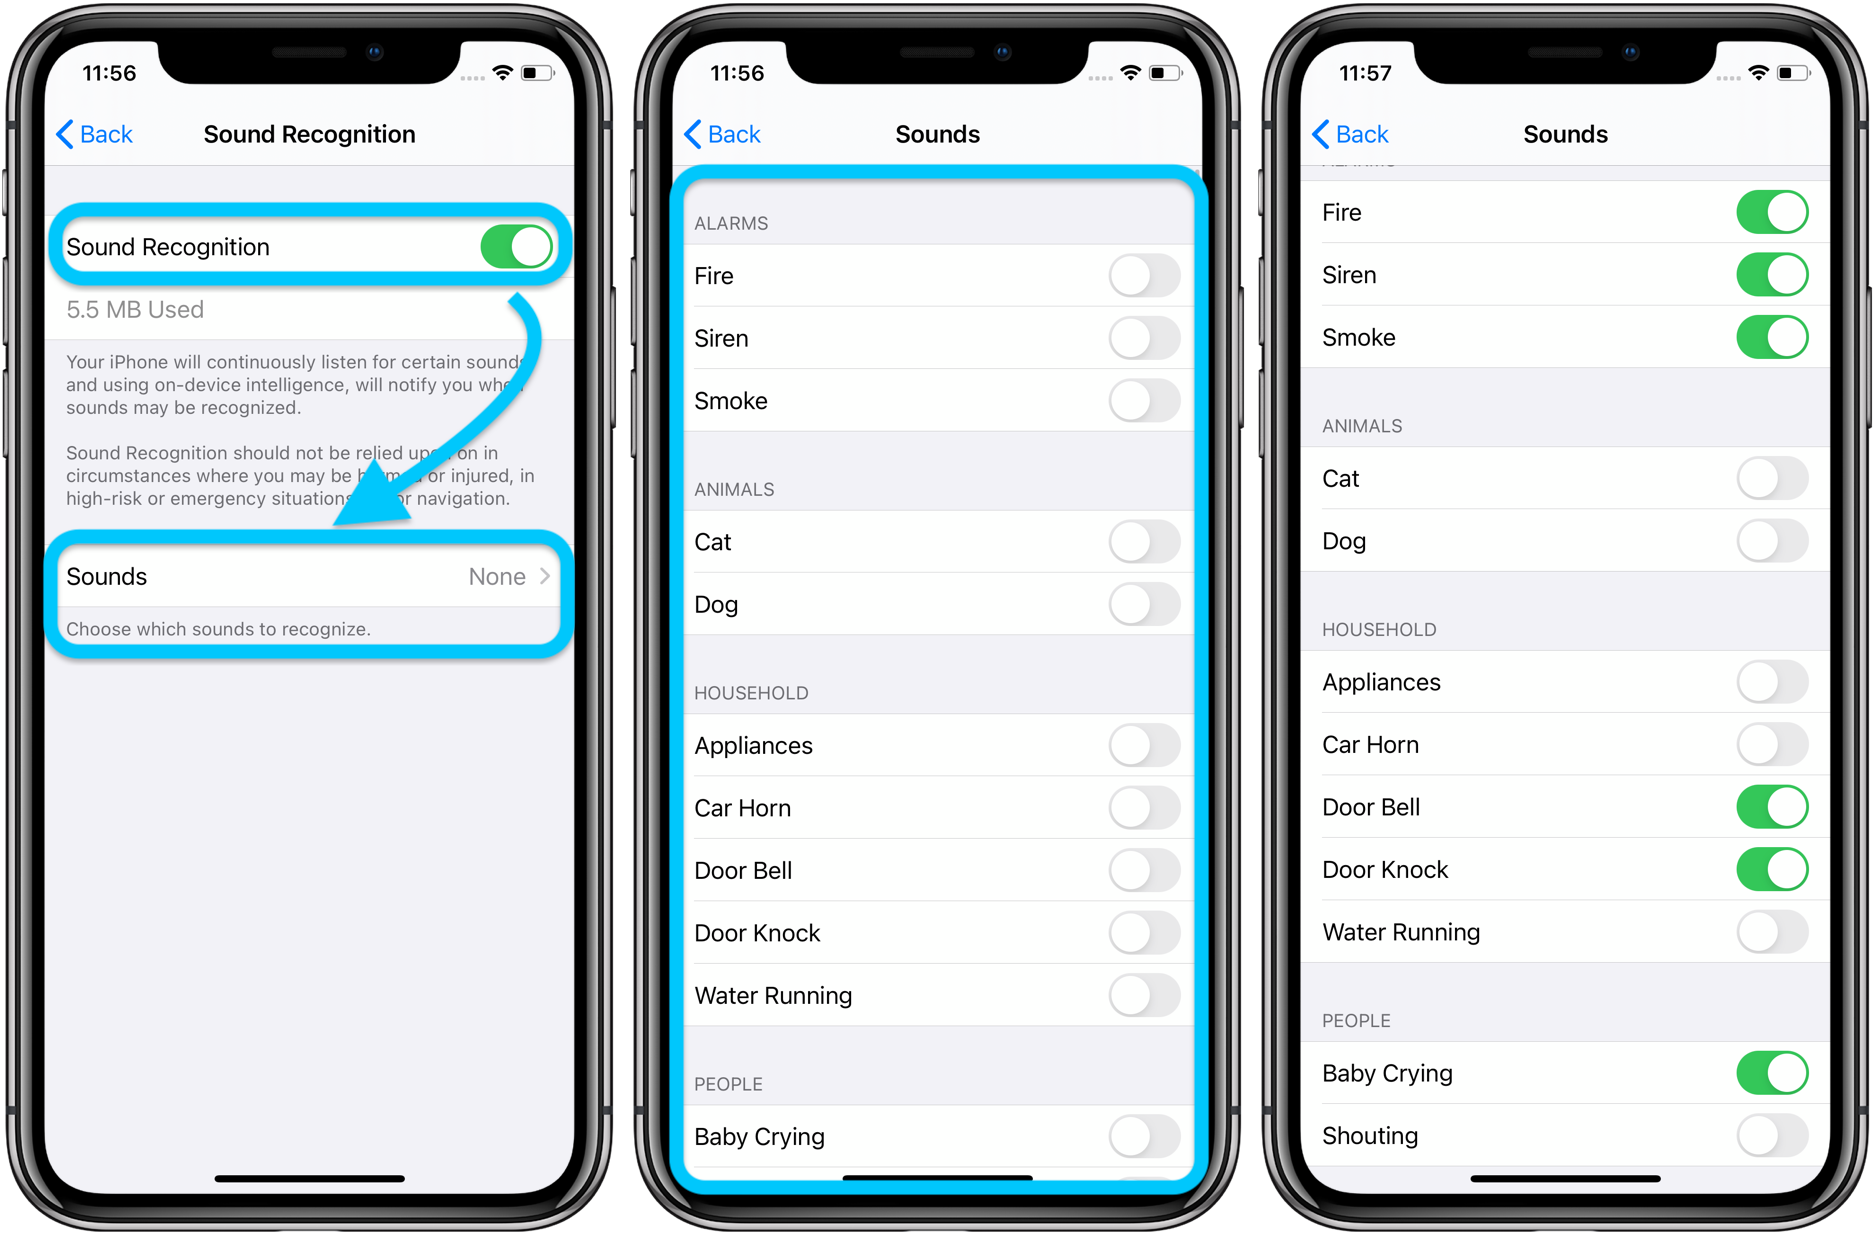 How to use iPhone Sound Recognition in iOS 14 - 9to5Mac